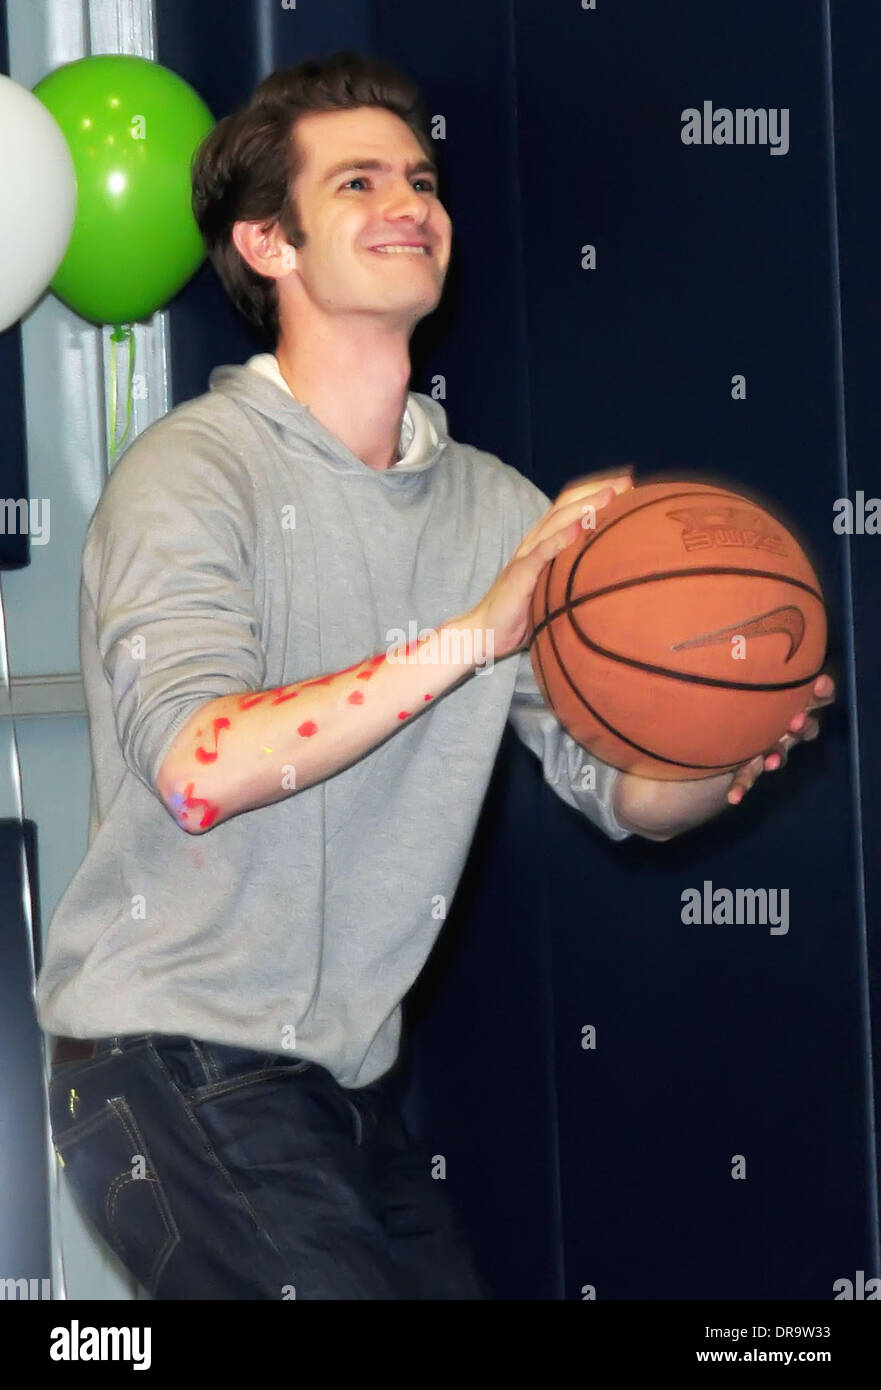 Andrew Garfield The cast of 'The Amazing Spider-Man' at the 'Be Amazing'  Stand Up Volunteer Initiative at Madison Boys and Girls Club, Brooklyn New  York City, USA - 26.06.12 Stock Photo - Alamy